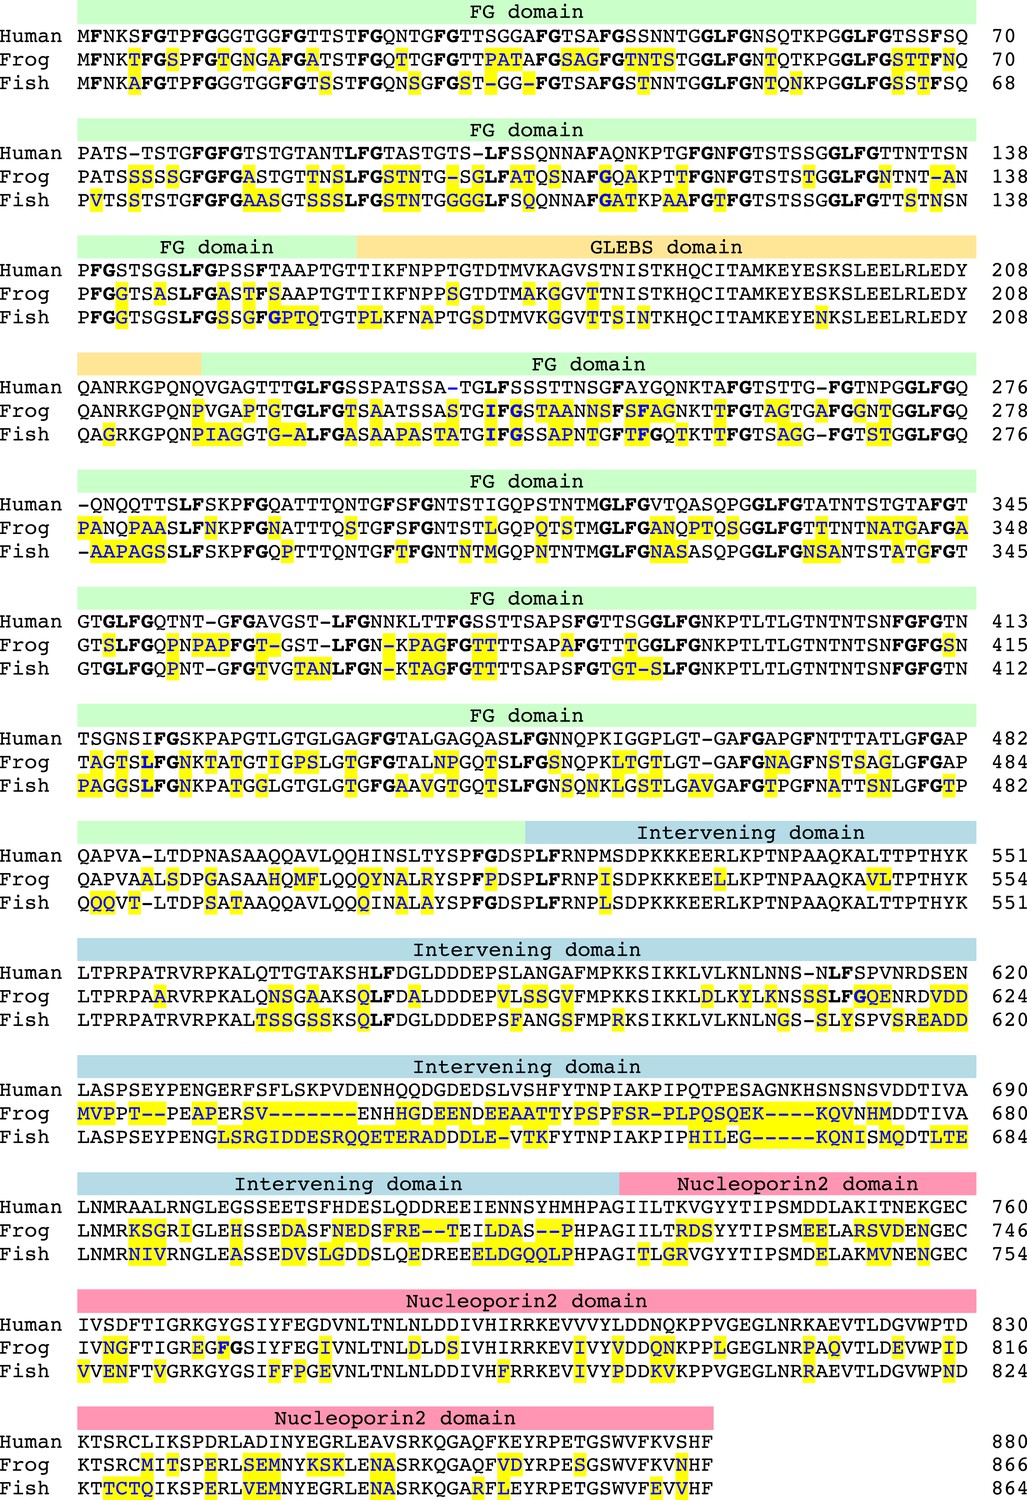 Nup98 Fg Domains From Diverse Species Spontaneously Phase Separate